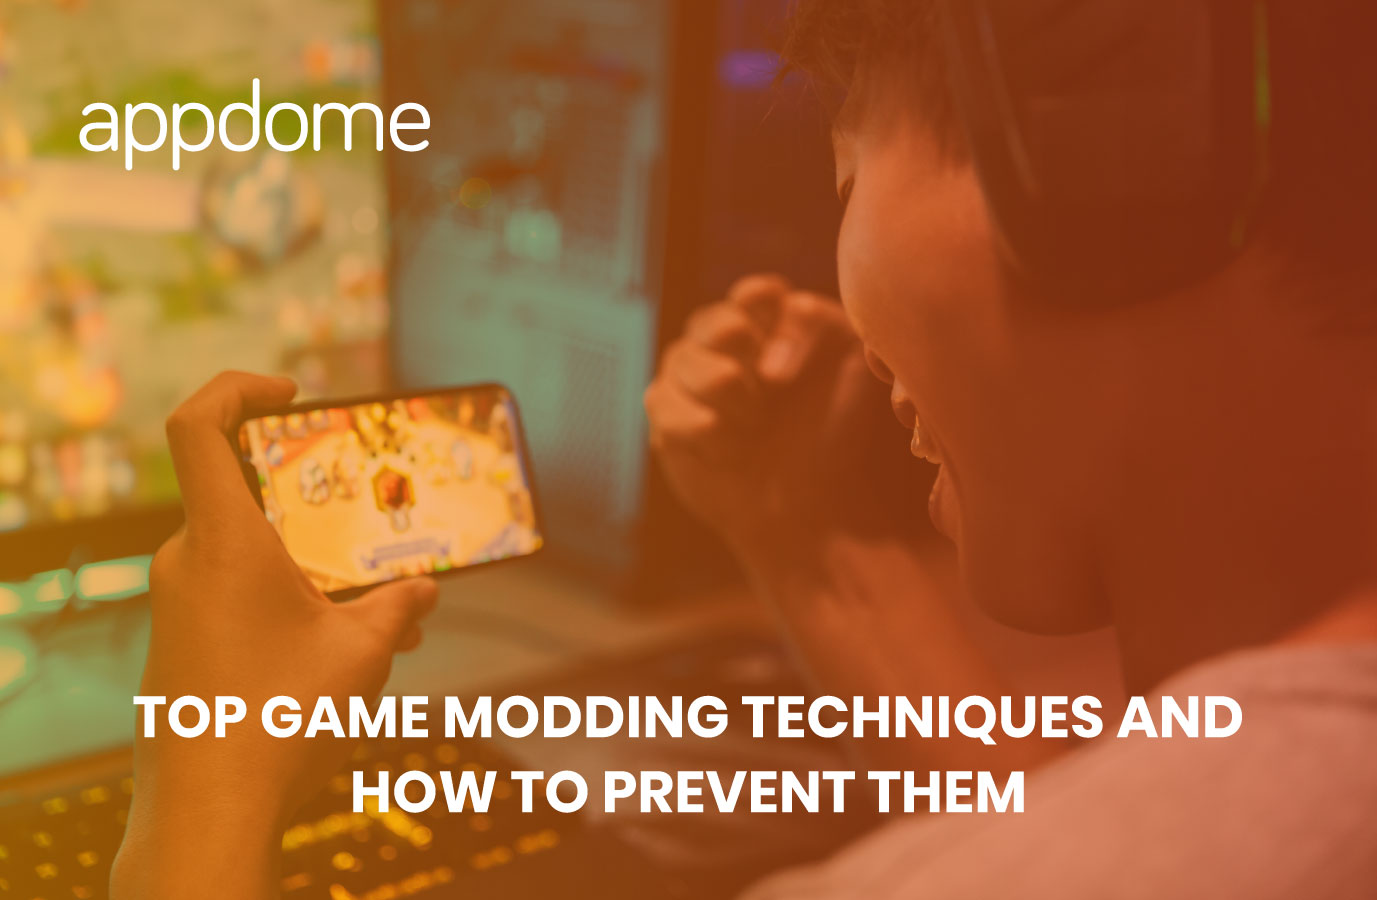 A method for preventing online games hacking using memory